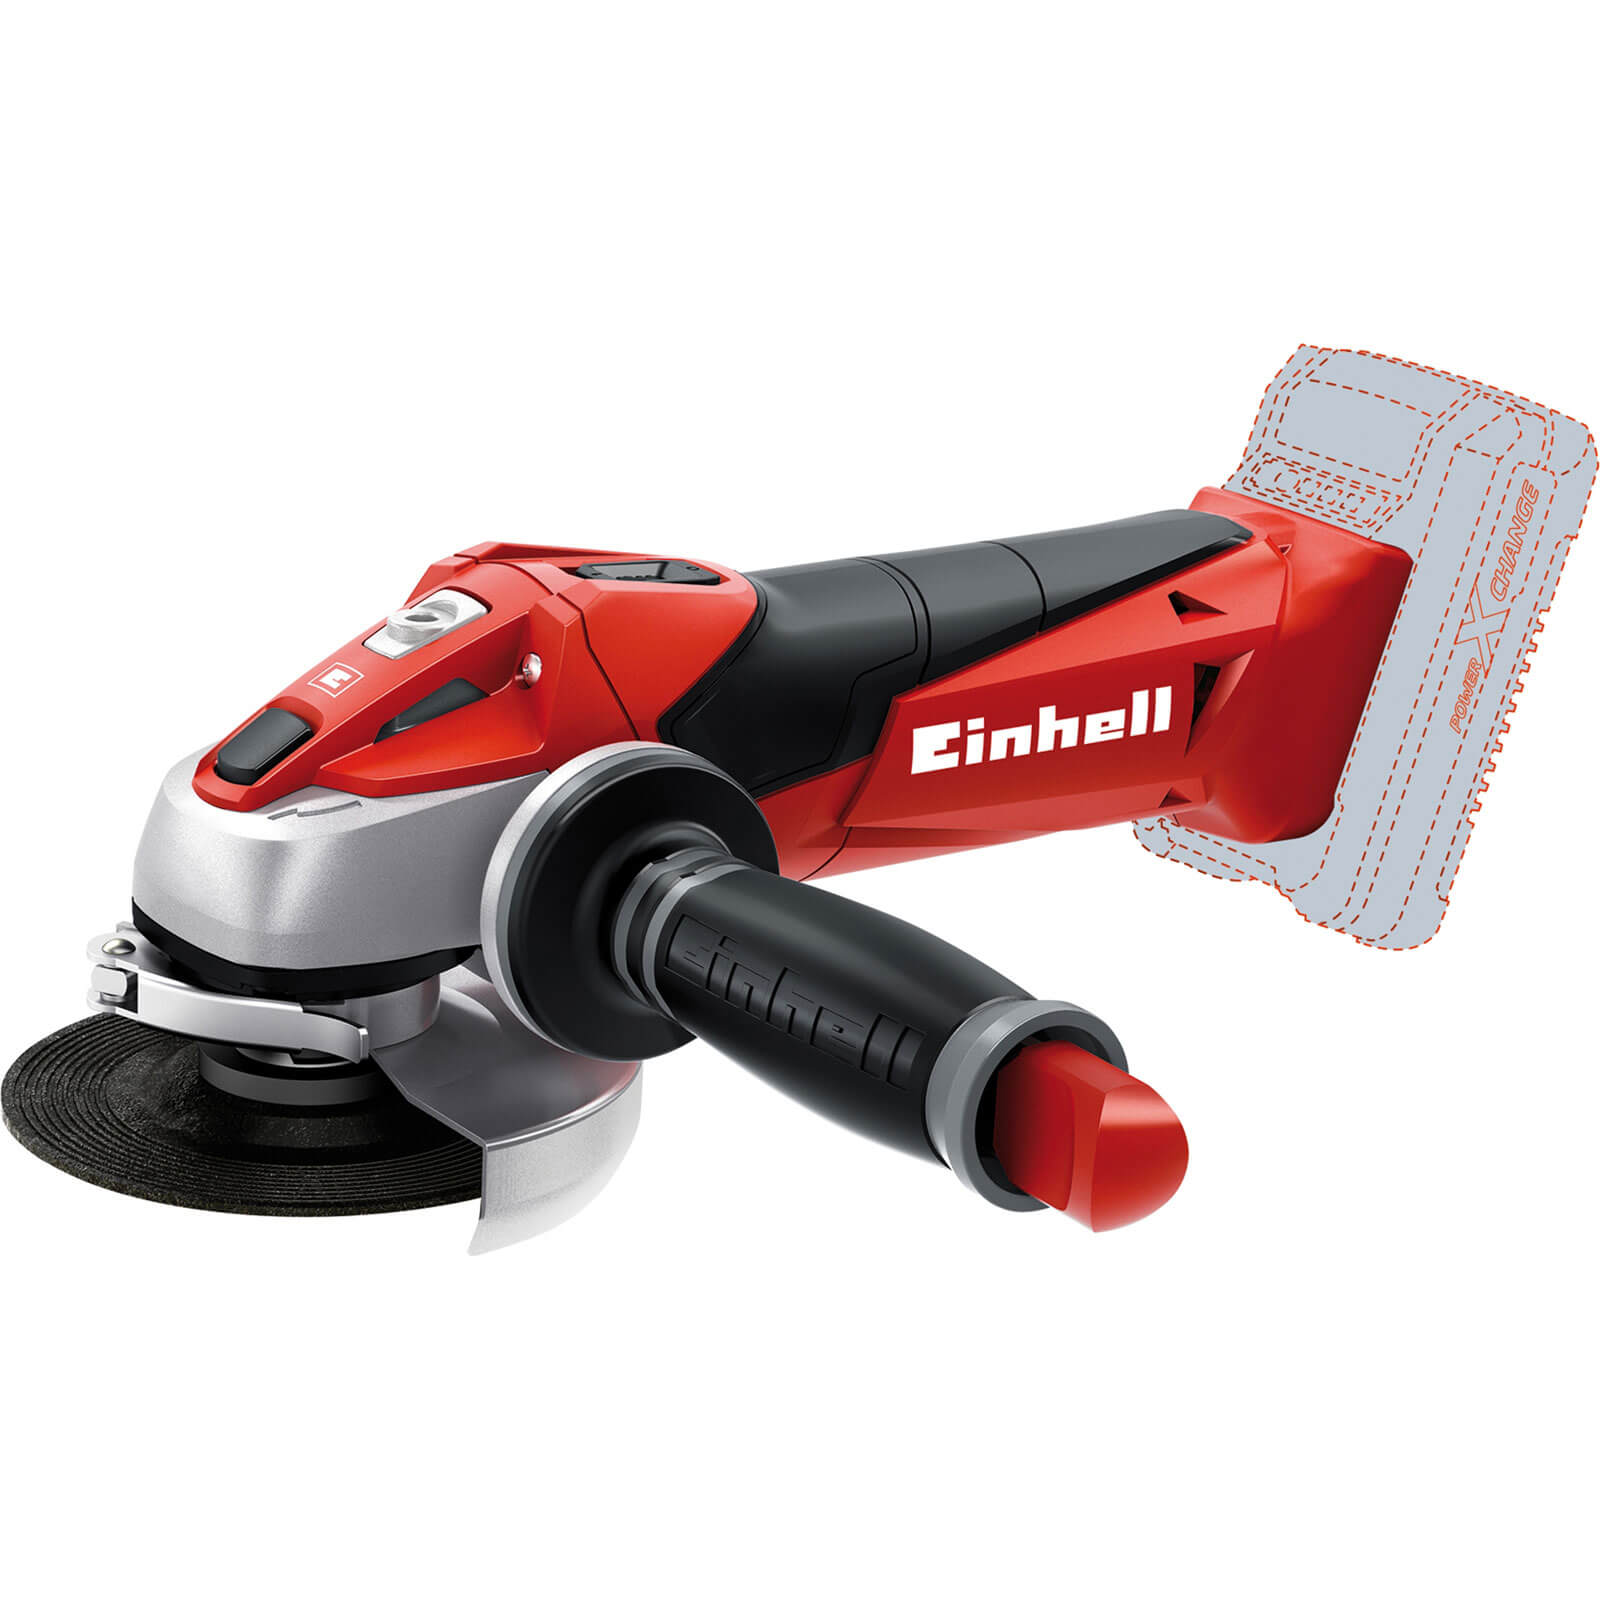 Image of Einhell TE-AG 18/115 Li 18v Cordless Angle Grinder 115mm No Batteries No Charger No Case